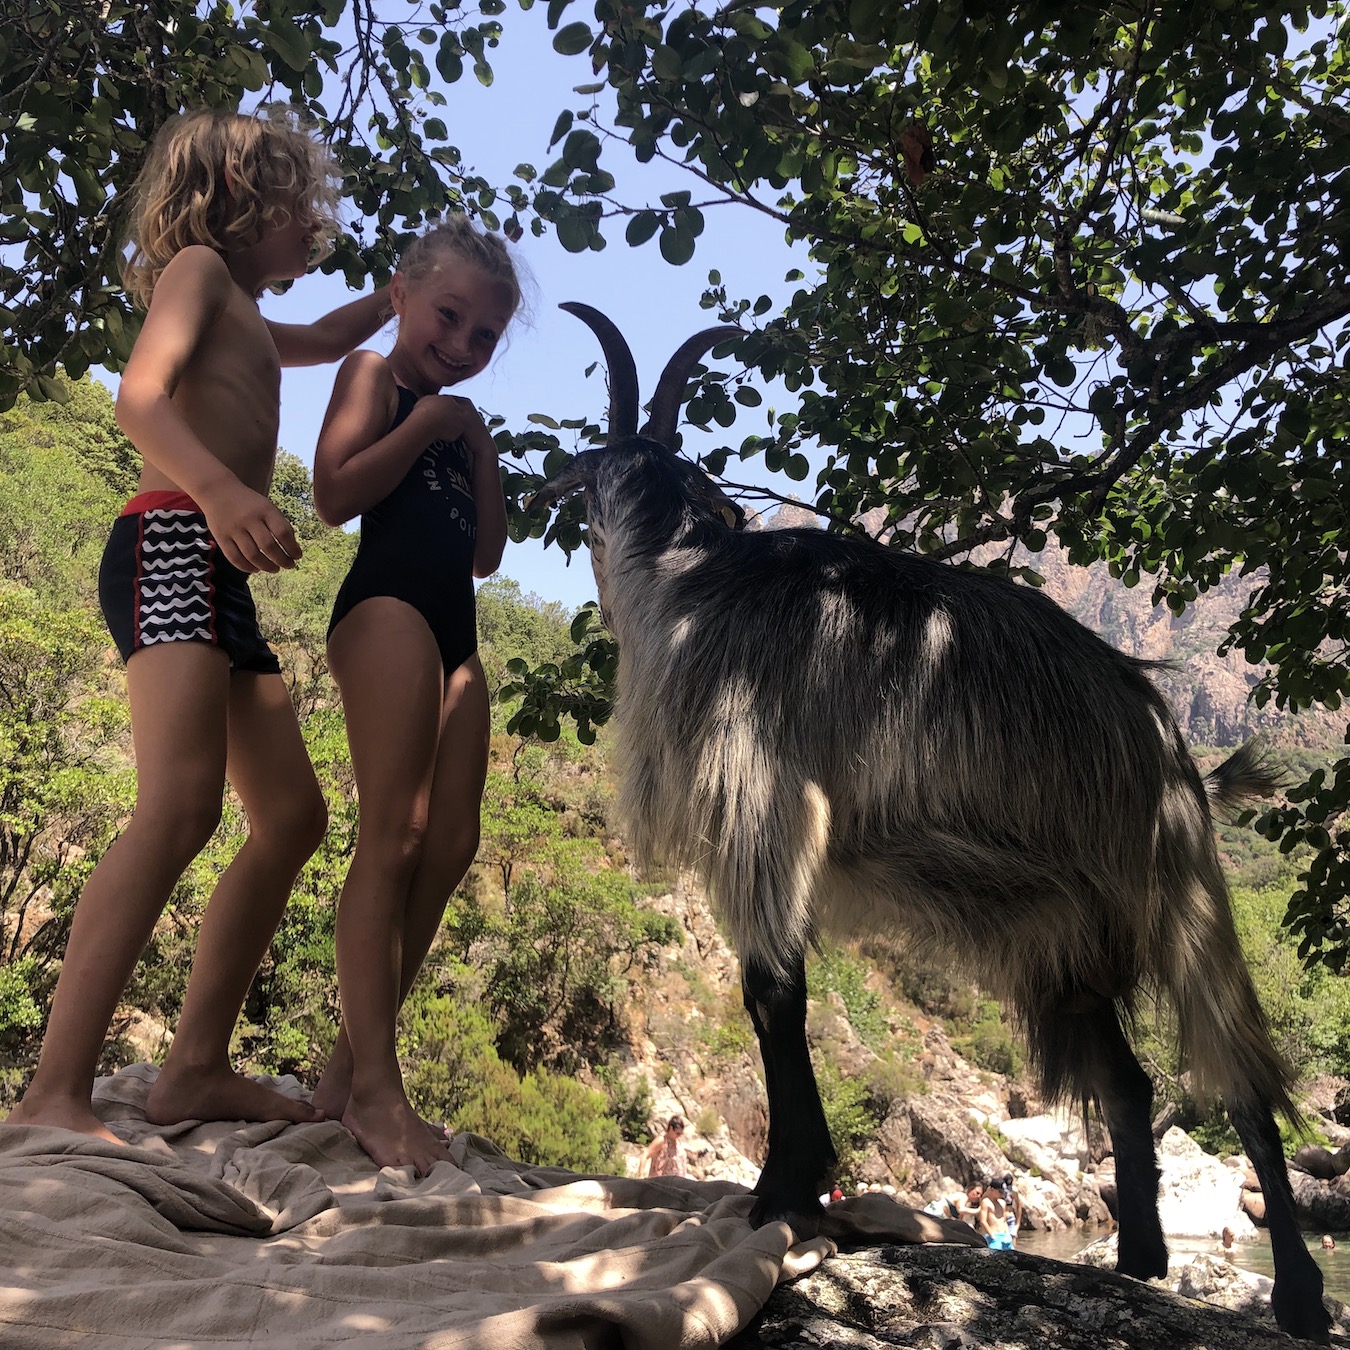 A visit from a goat